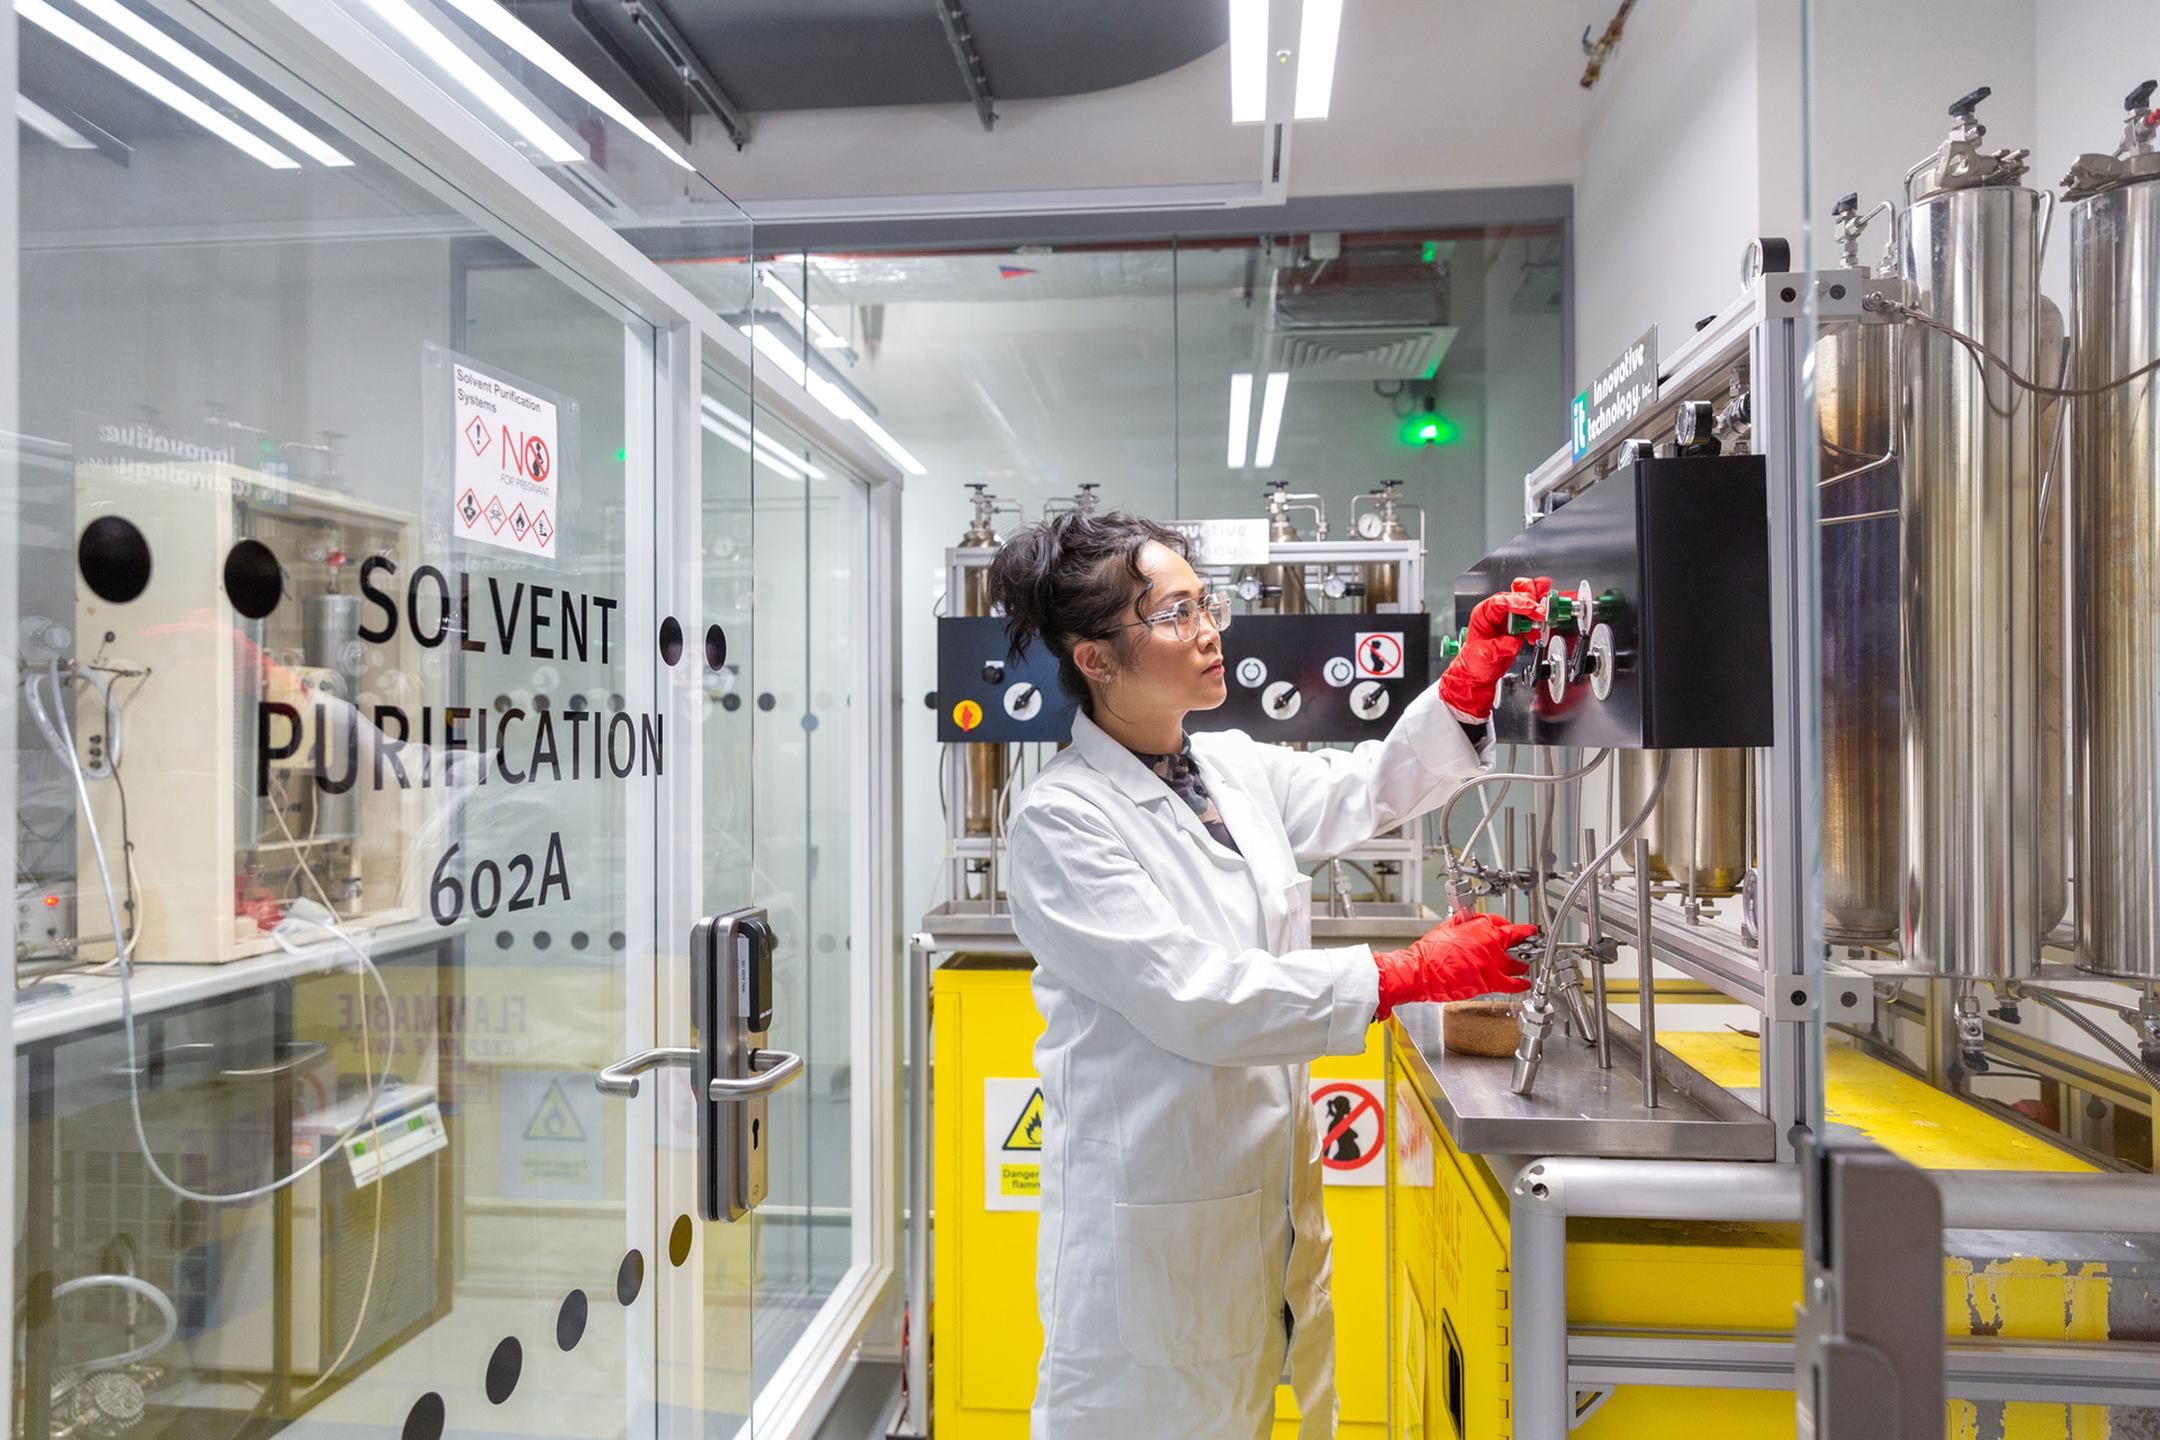 A technician wearing a lab coat, safety glasses and protective gloves adjusts dials on equipment in the Molecular Sciences Research Hub.